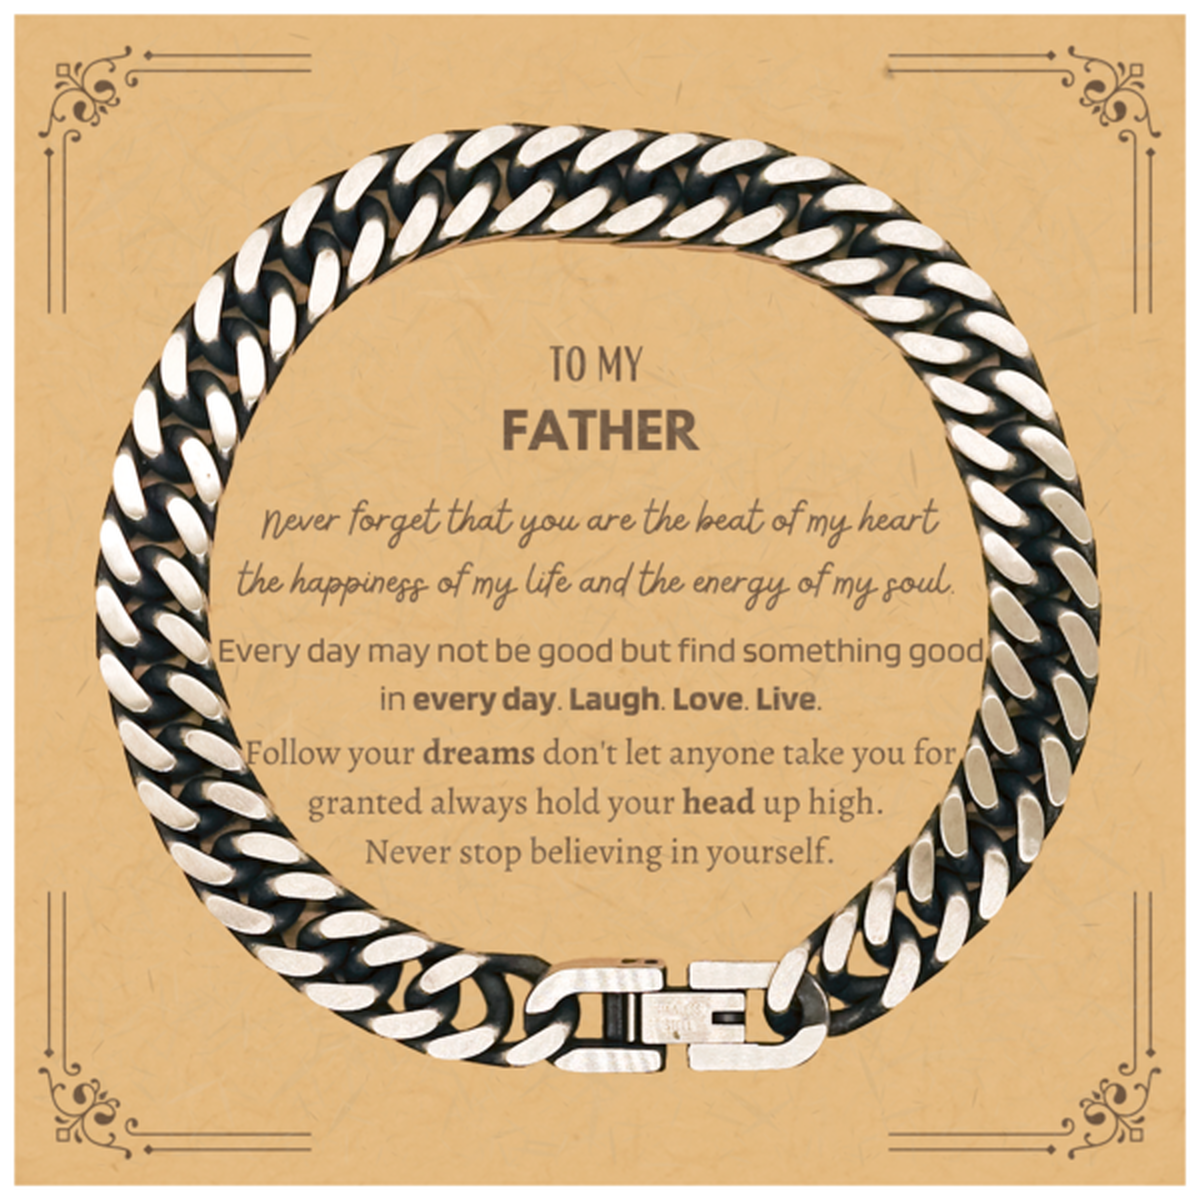 To My Father Message Card Gifts, Christmas Father Cuban Link Chain Bracelet Present, Birthday Unique Motivational For Father, To My Father Never forget that you are the beat of my heart the happiness of my life and the energy of my soul